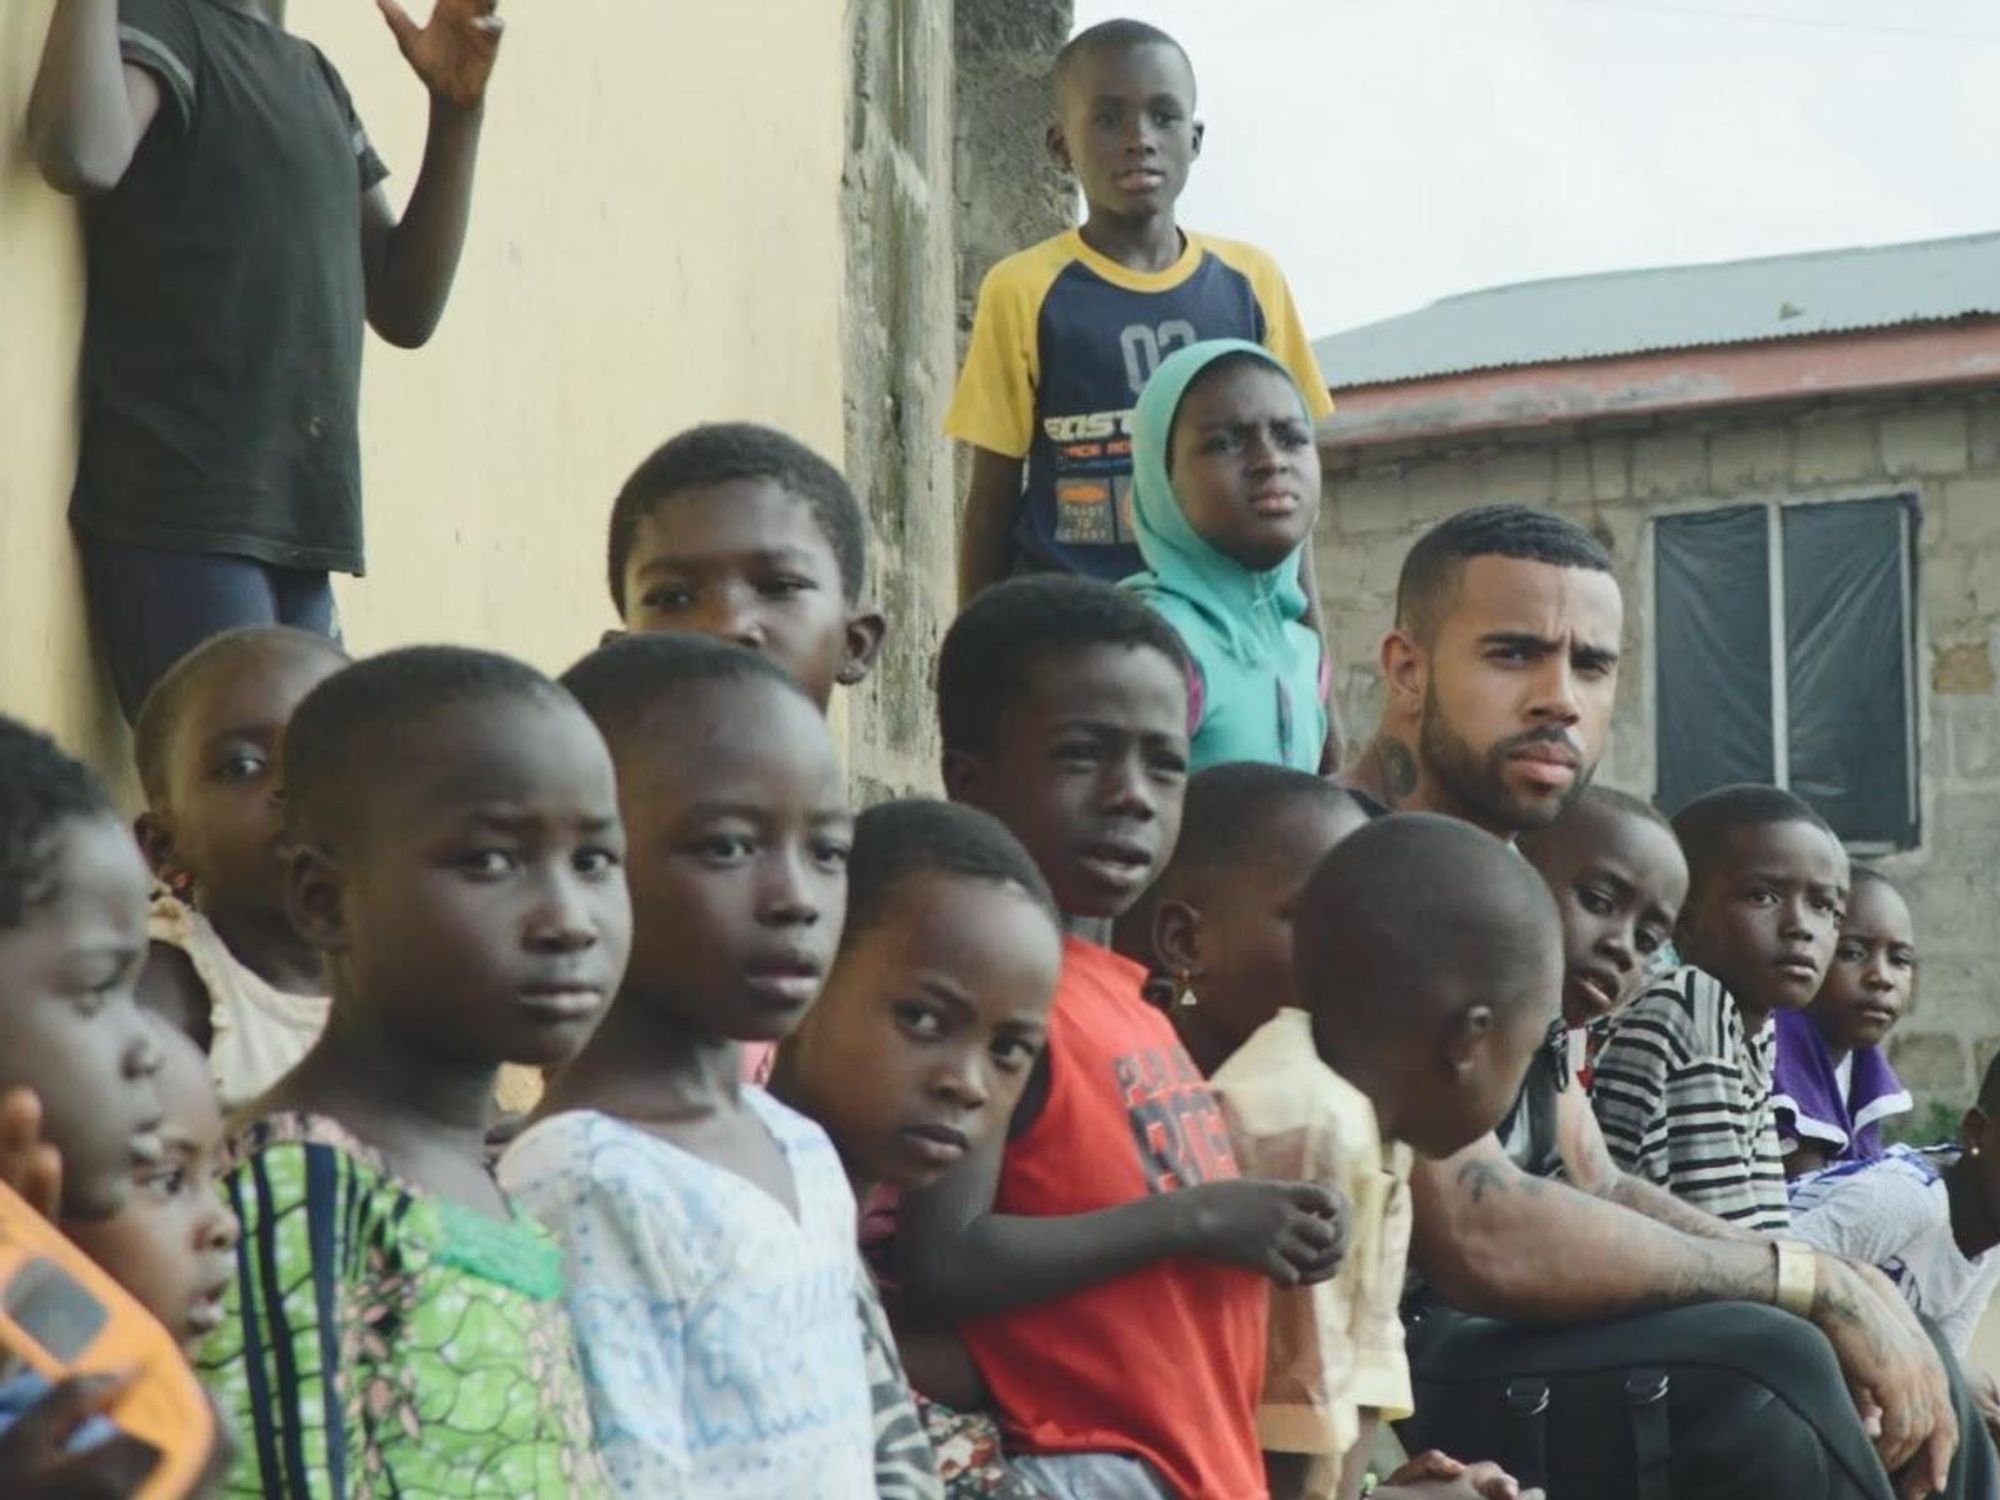 Vic Mensa is Planning to Bring Clean Water to Over 200k People in Ghana